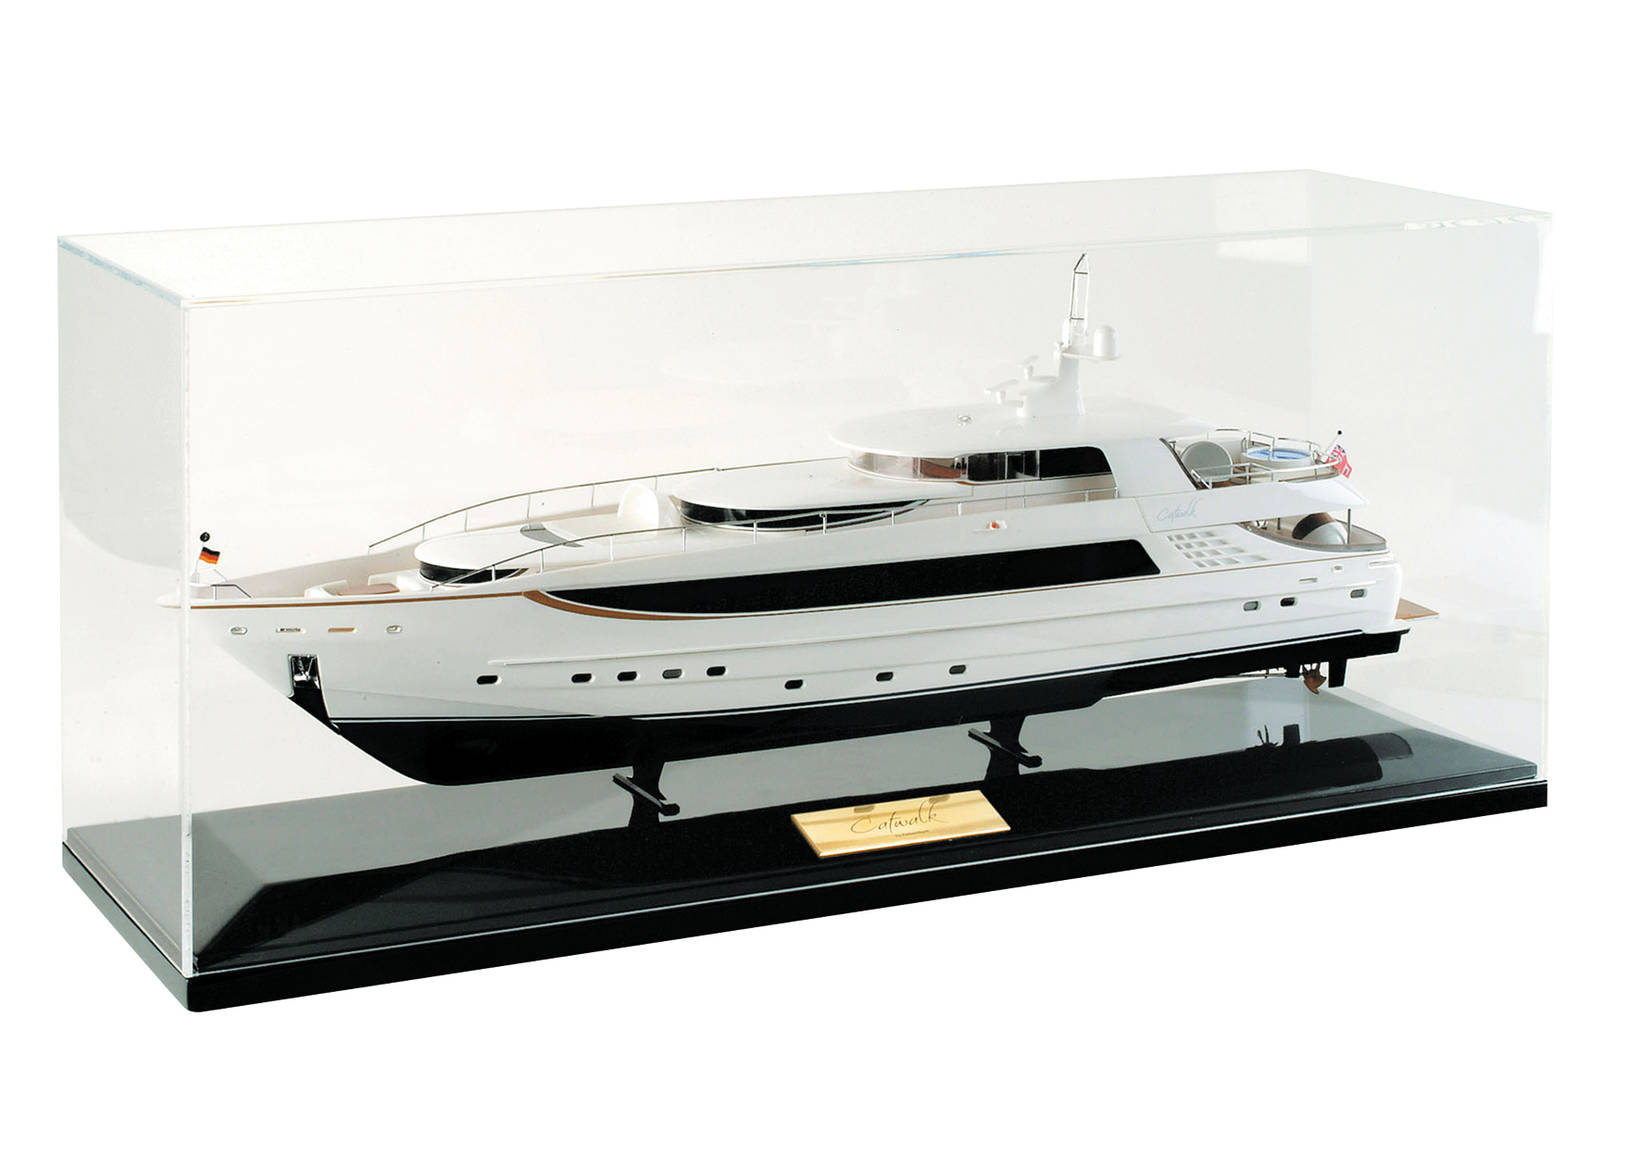 premium acrylic cover for Catwalk Yacht on display stand